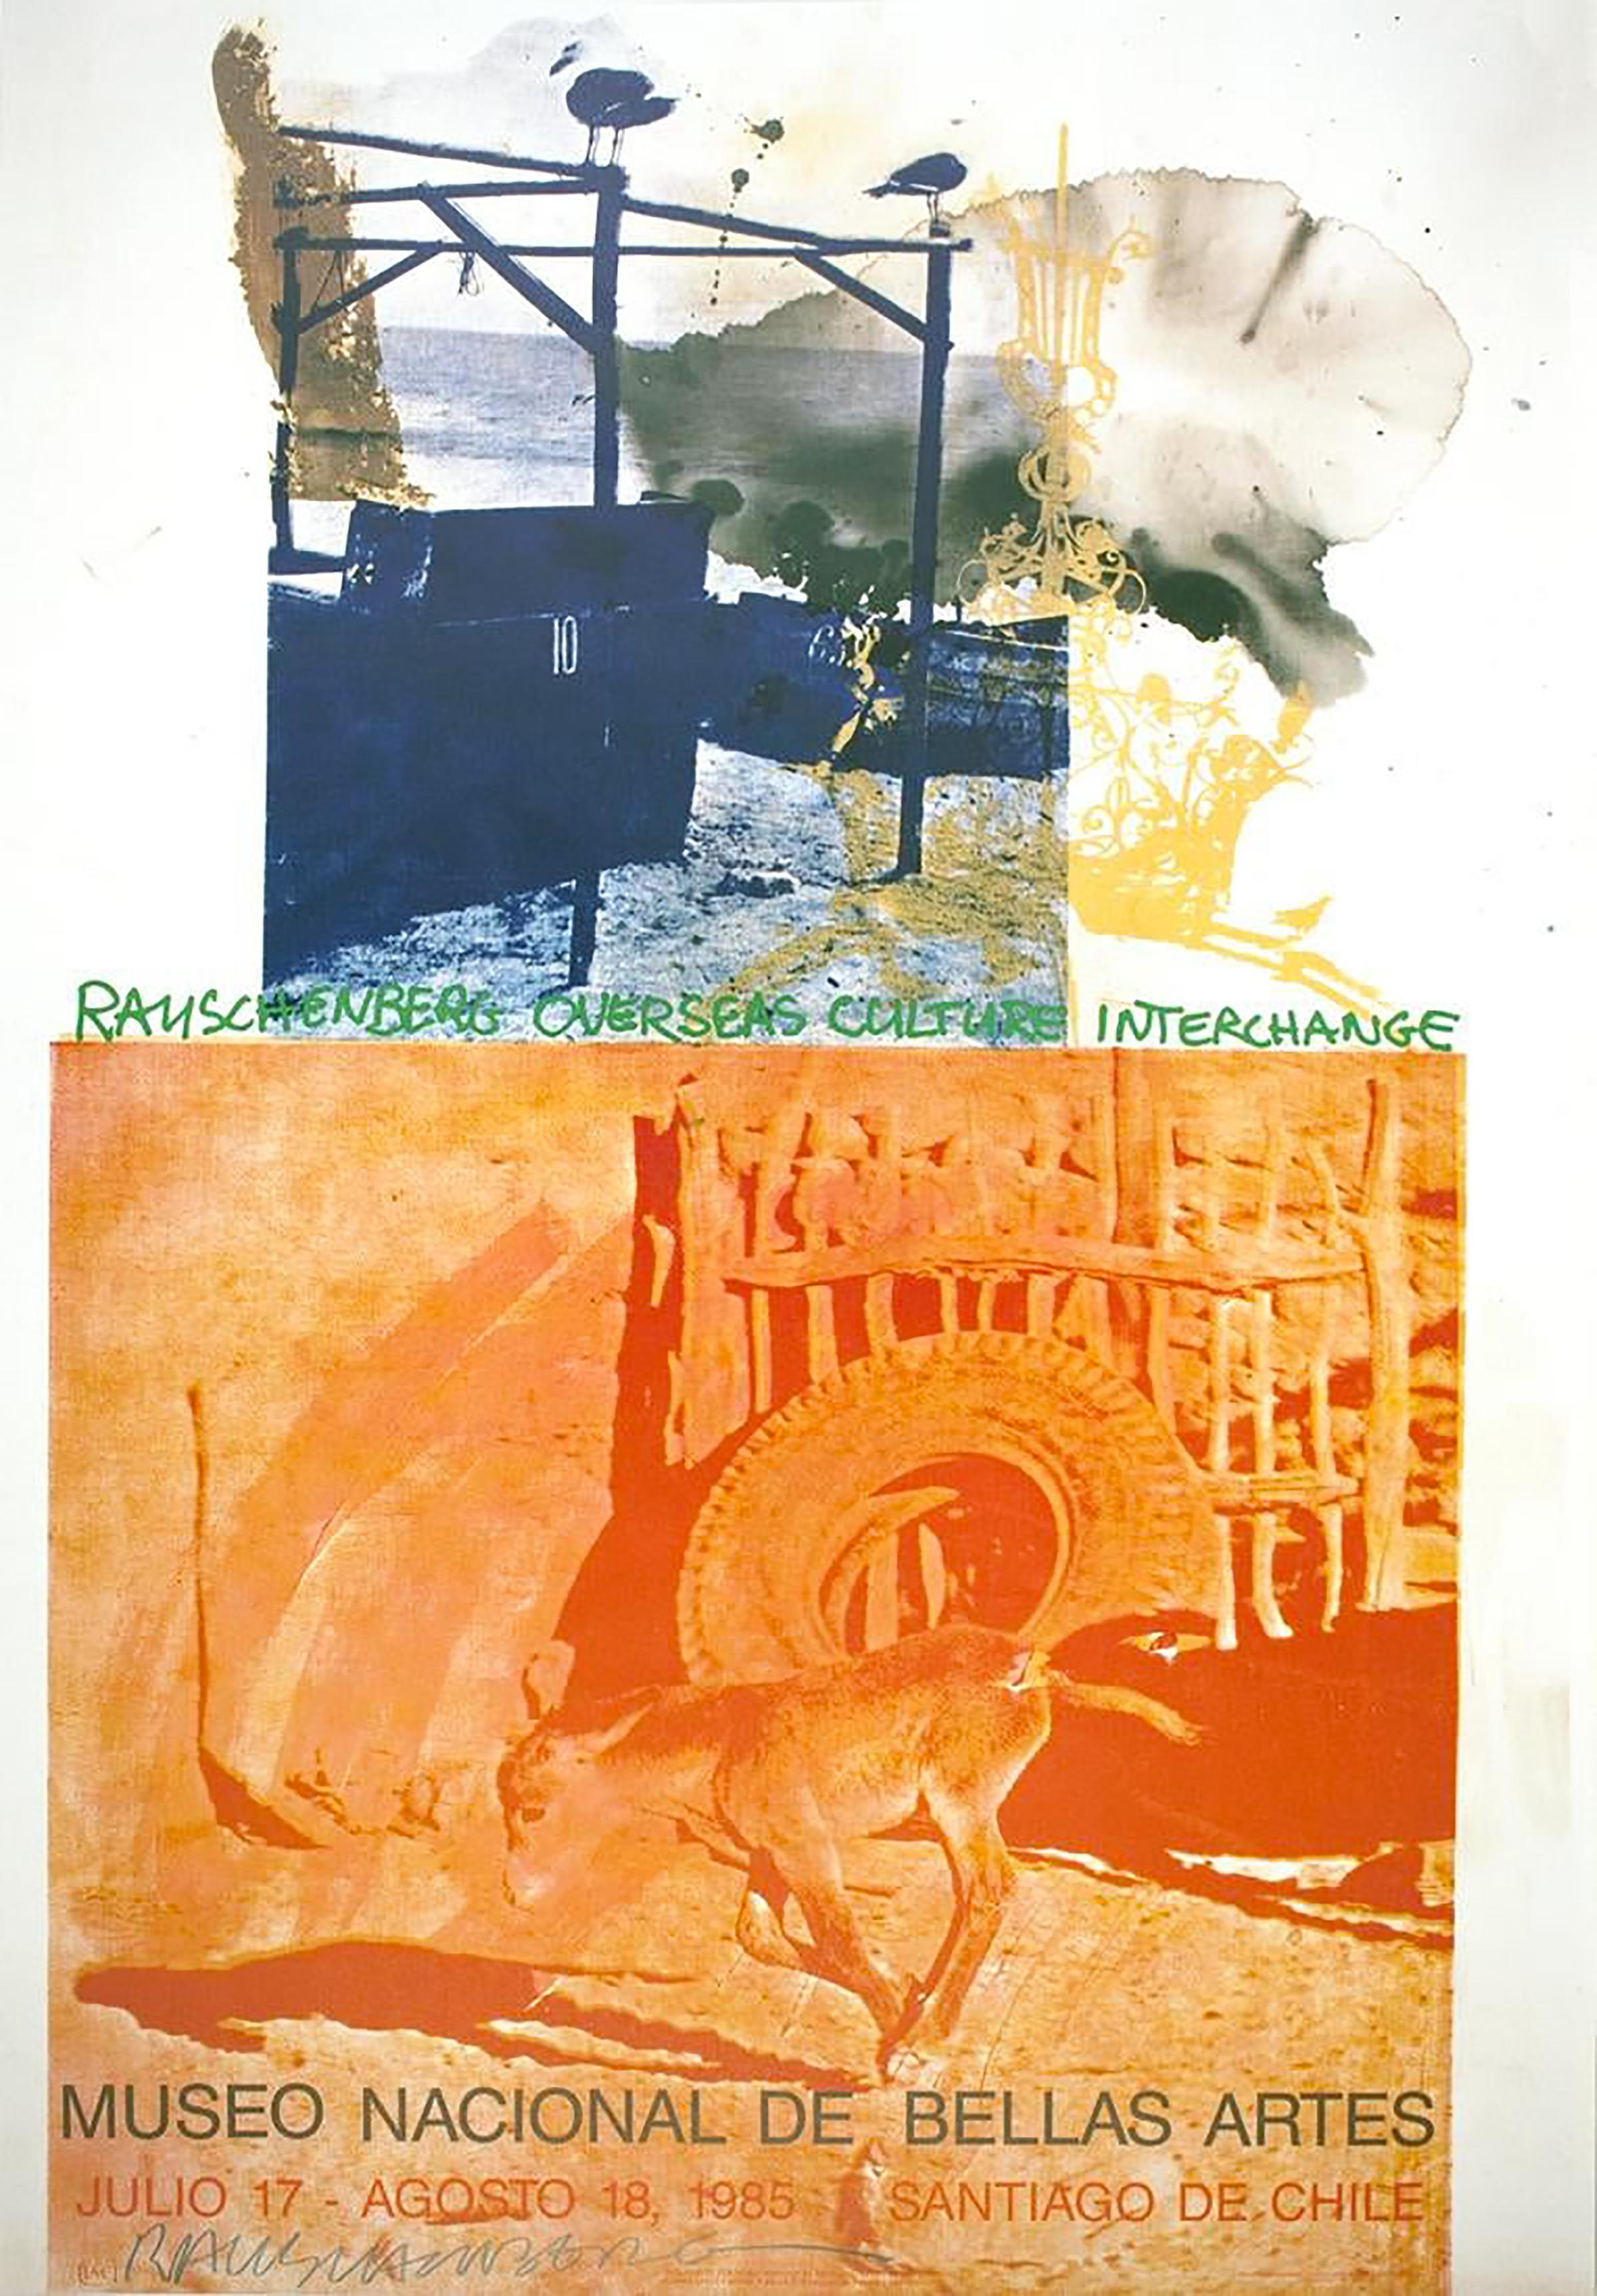 "ROCI: Chile" (1985) is an offset lithograph on paper created by world renowned American artist James Robert Rauschenberg (1925 - 2008). 

The artwork represents the first printing exhibition poster created for Rauschenberg's Overseas Culture